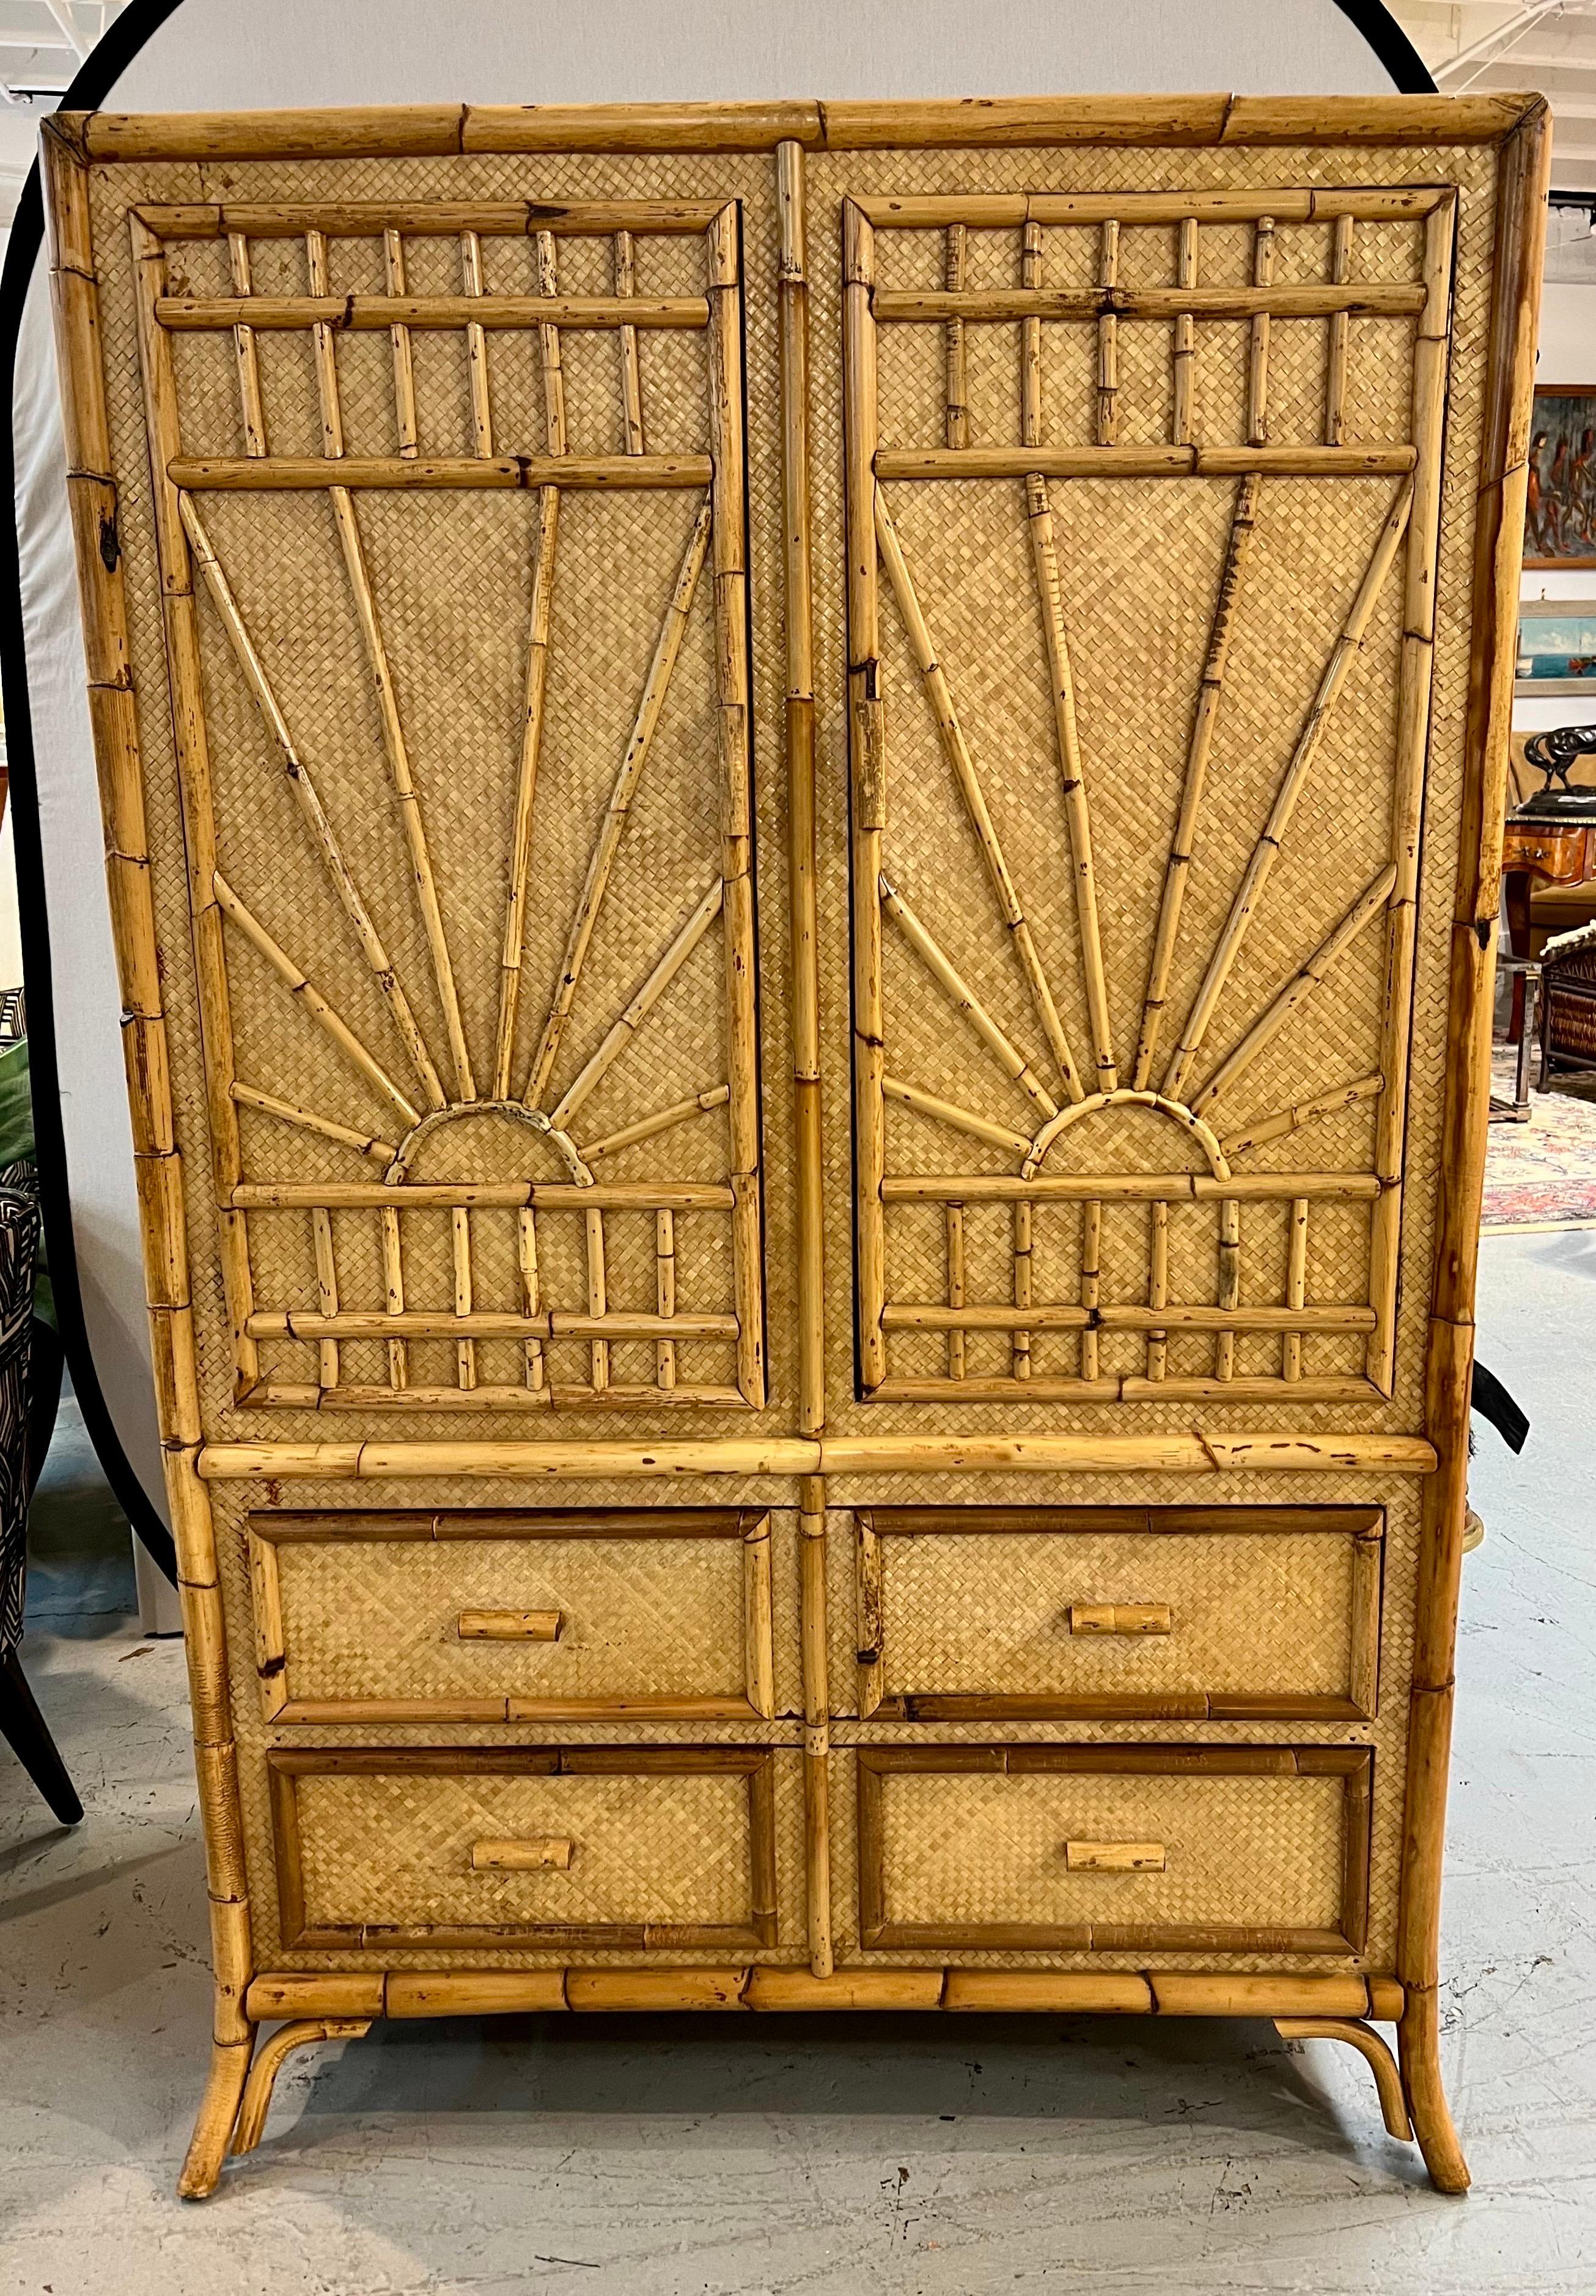 Vintage chinoiserie bamboo and rattan wardrobe or armoire with multiple shelves and compartments. Stellar craftsmanship throughout. Rare to find a bamboo and rattan piece with this scale.  Why not own the best?